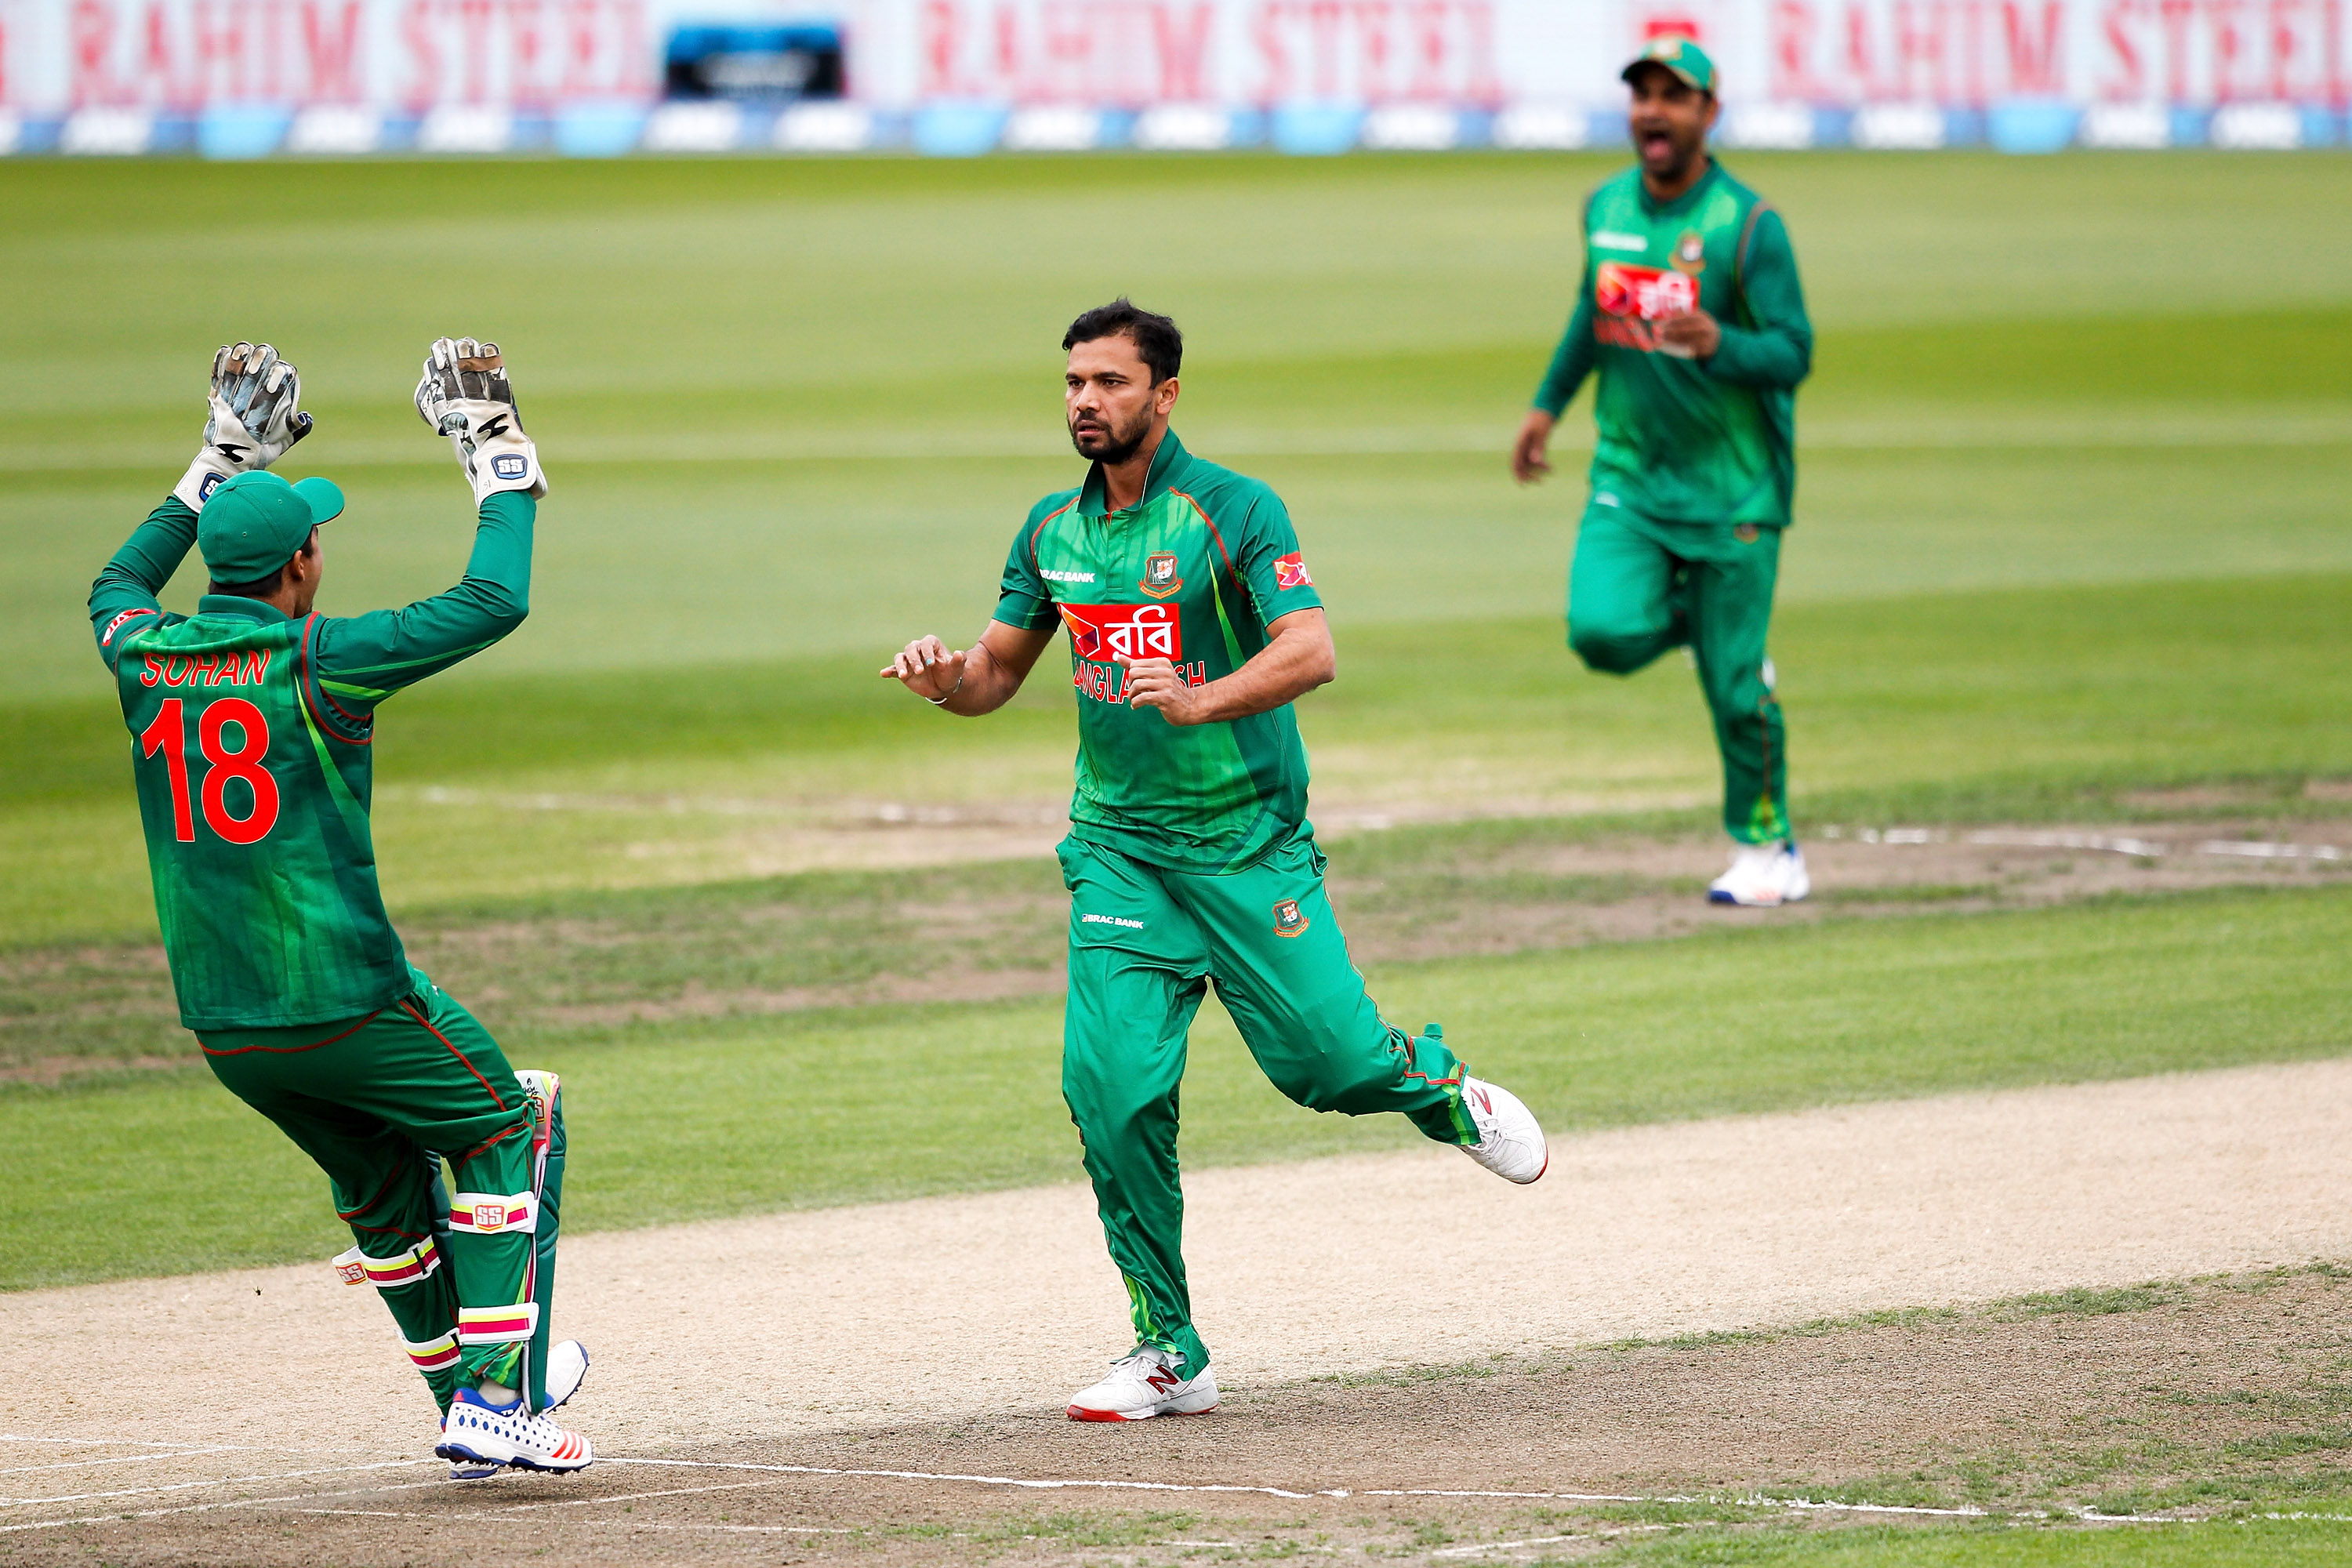 ICC World Cup 2019 | Mashrafe Mortaza shouldn’t be bothered about retirement, states Steve Rhodes